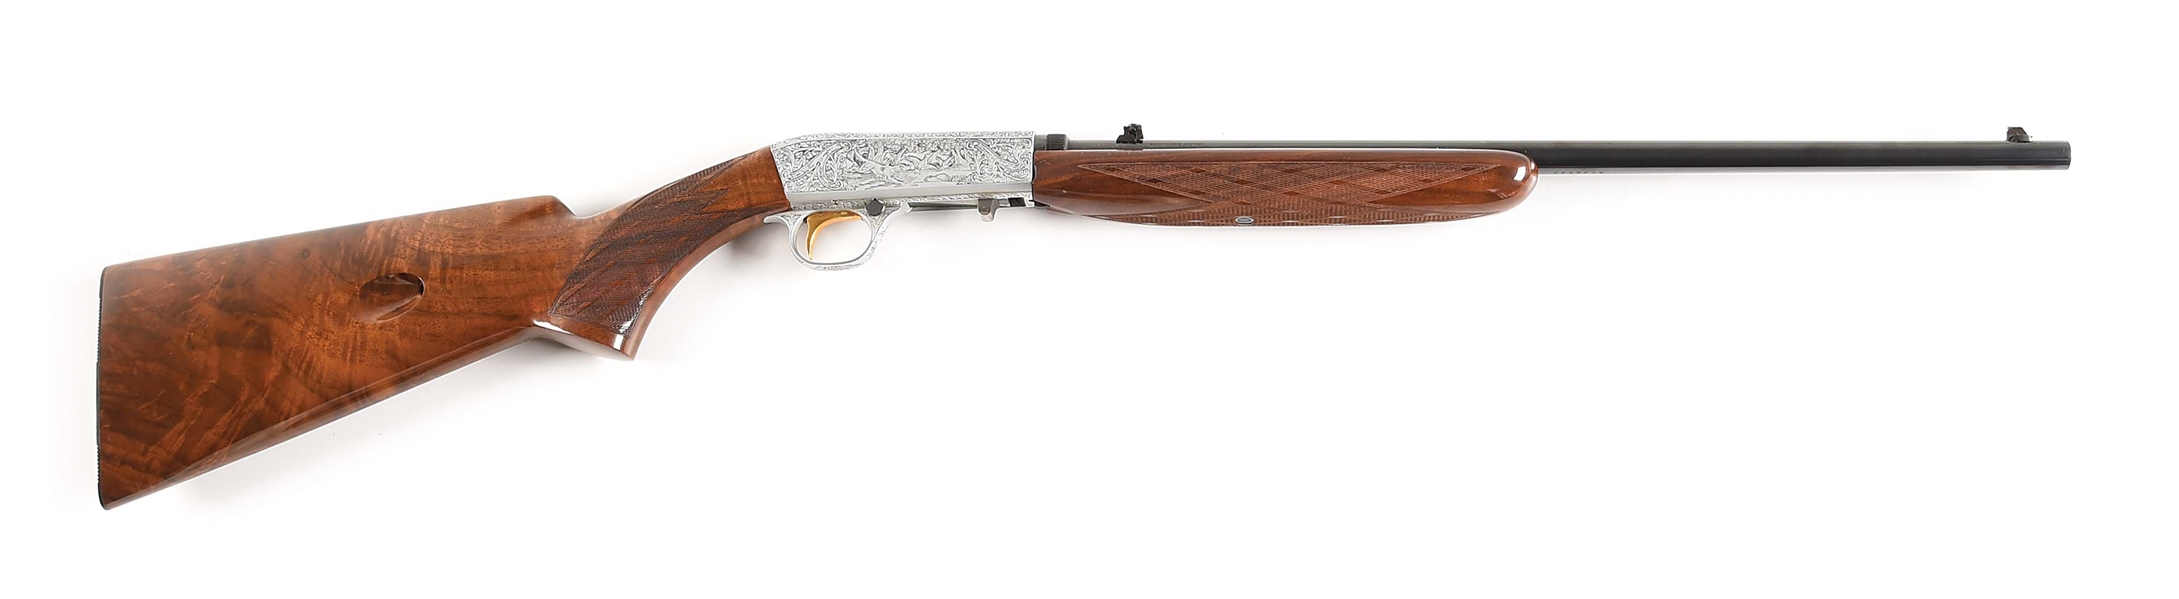 (C) BROWNING GRADE III SA-22 A. MARECHAL ENGRAVED .22 LR SEMI-AUTOMATIC RIFLE IN BOX.